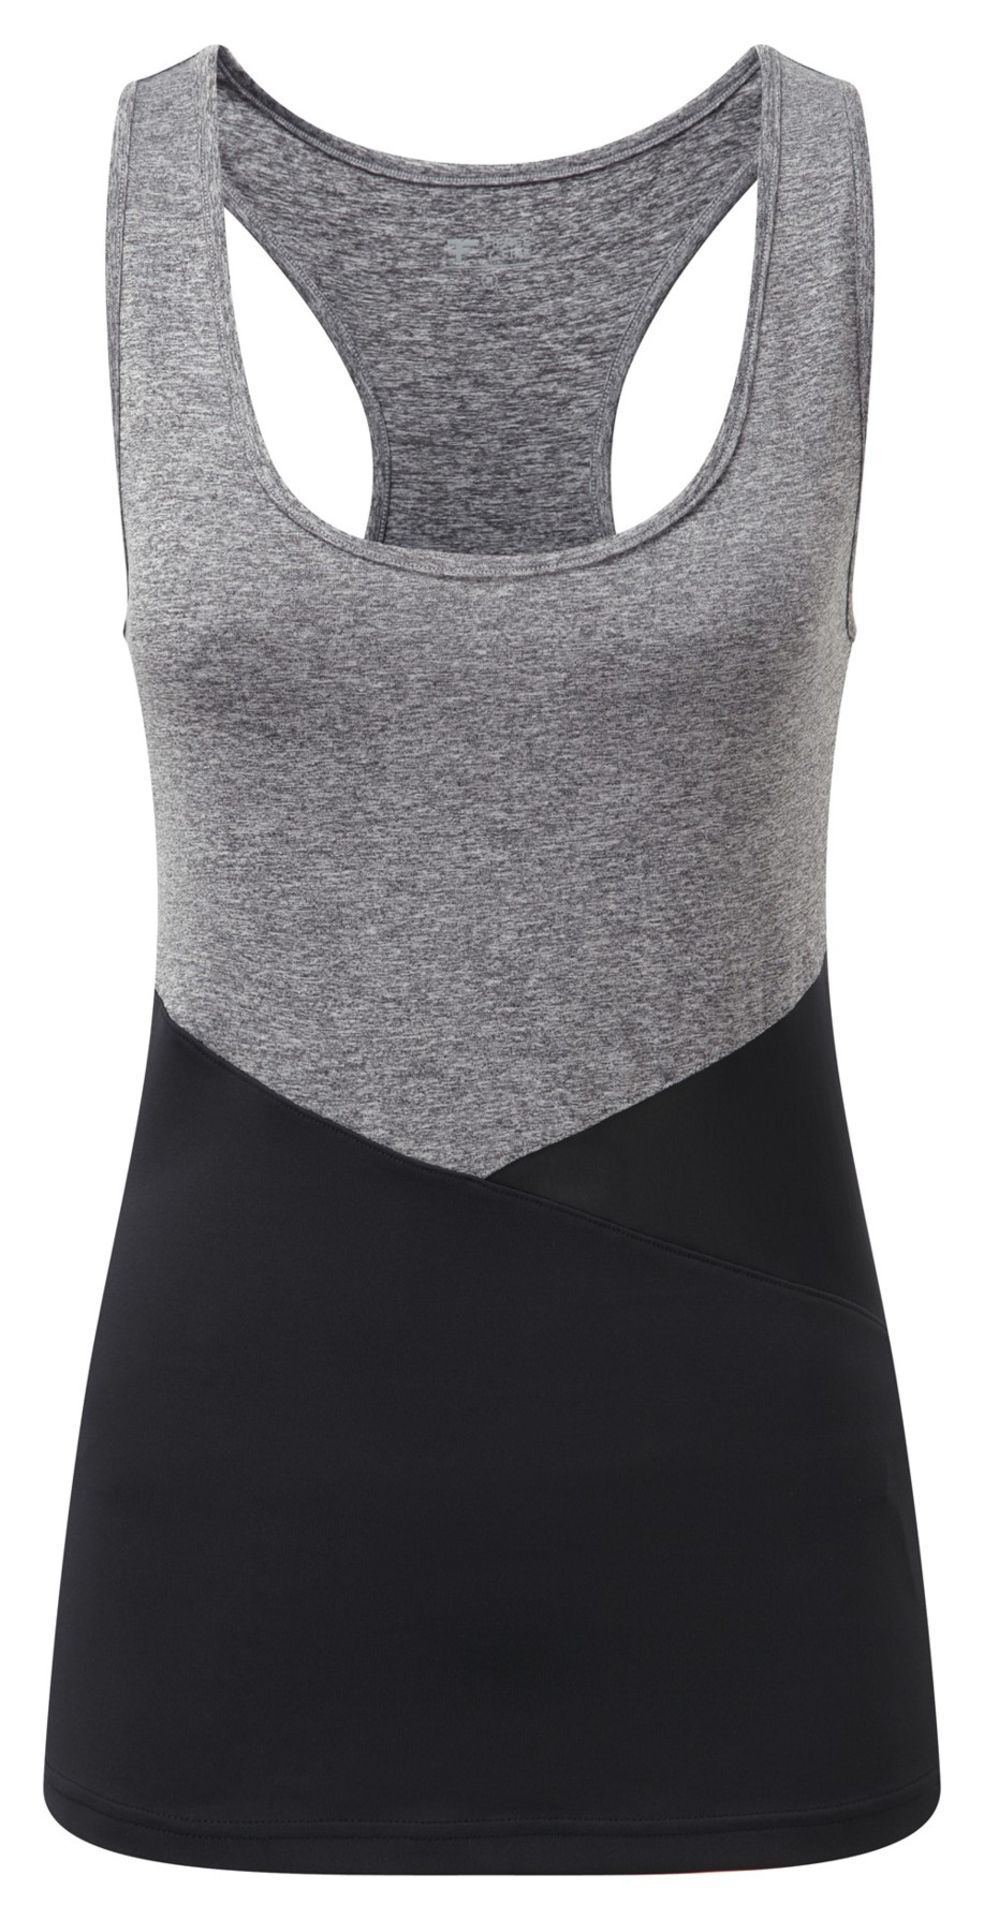 Liquidation of A Premium Gymwear Clothing Brand - 3,034 Items RRP £83,283.30. Huge variety of sizes, - Image 10 of 11